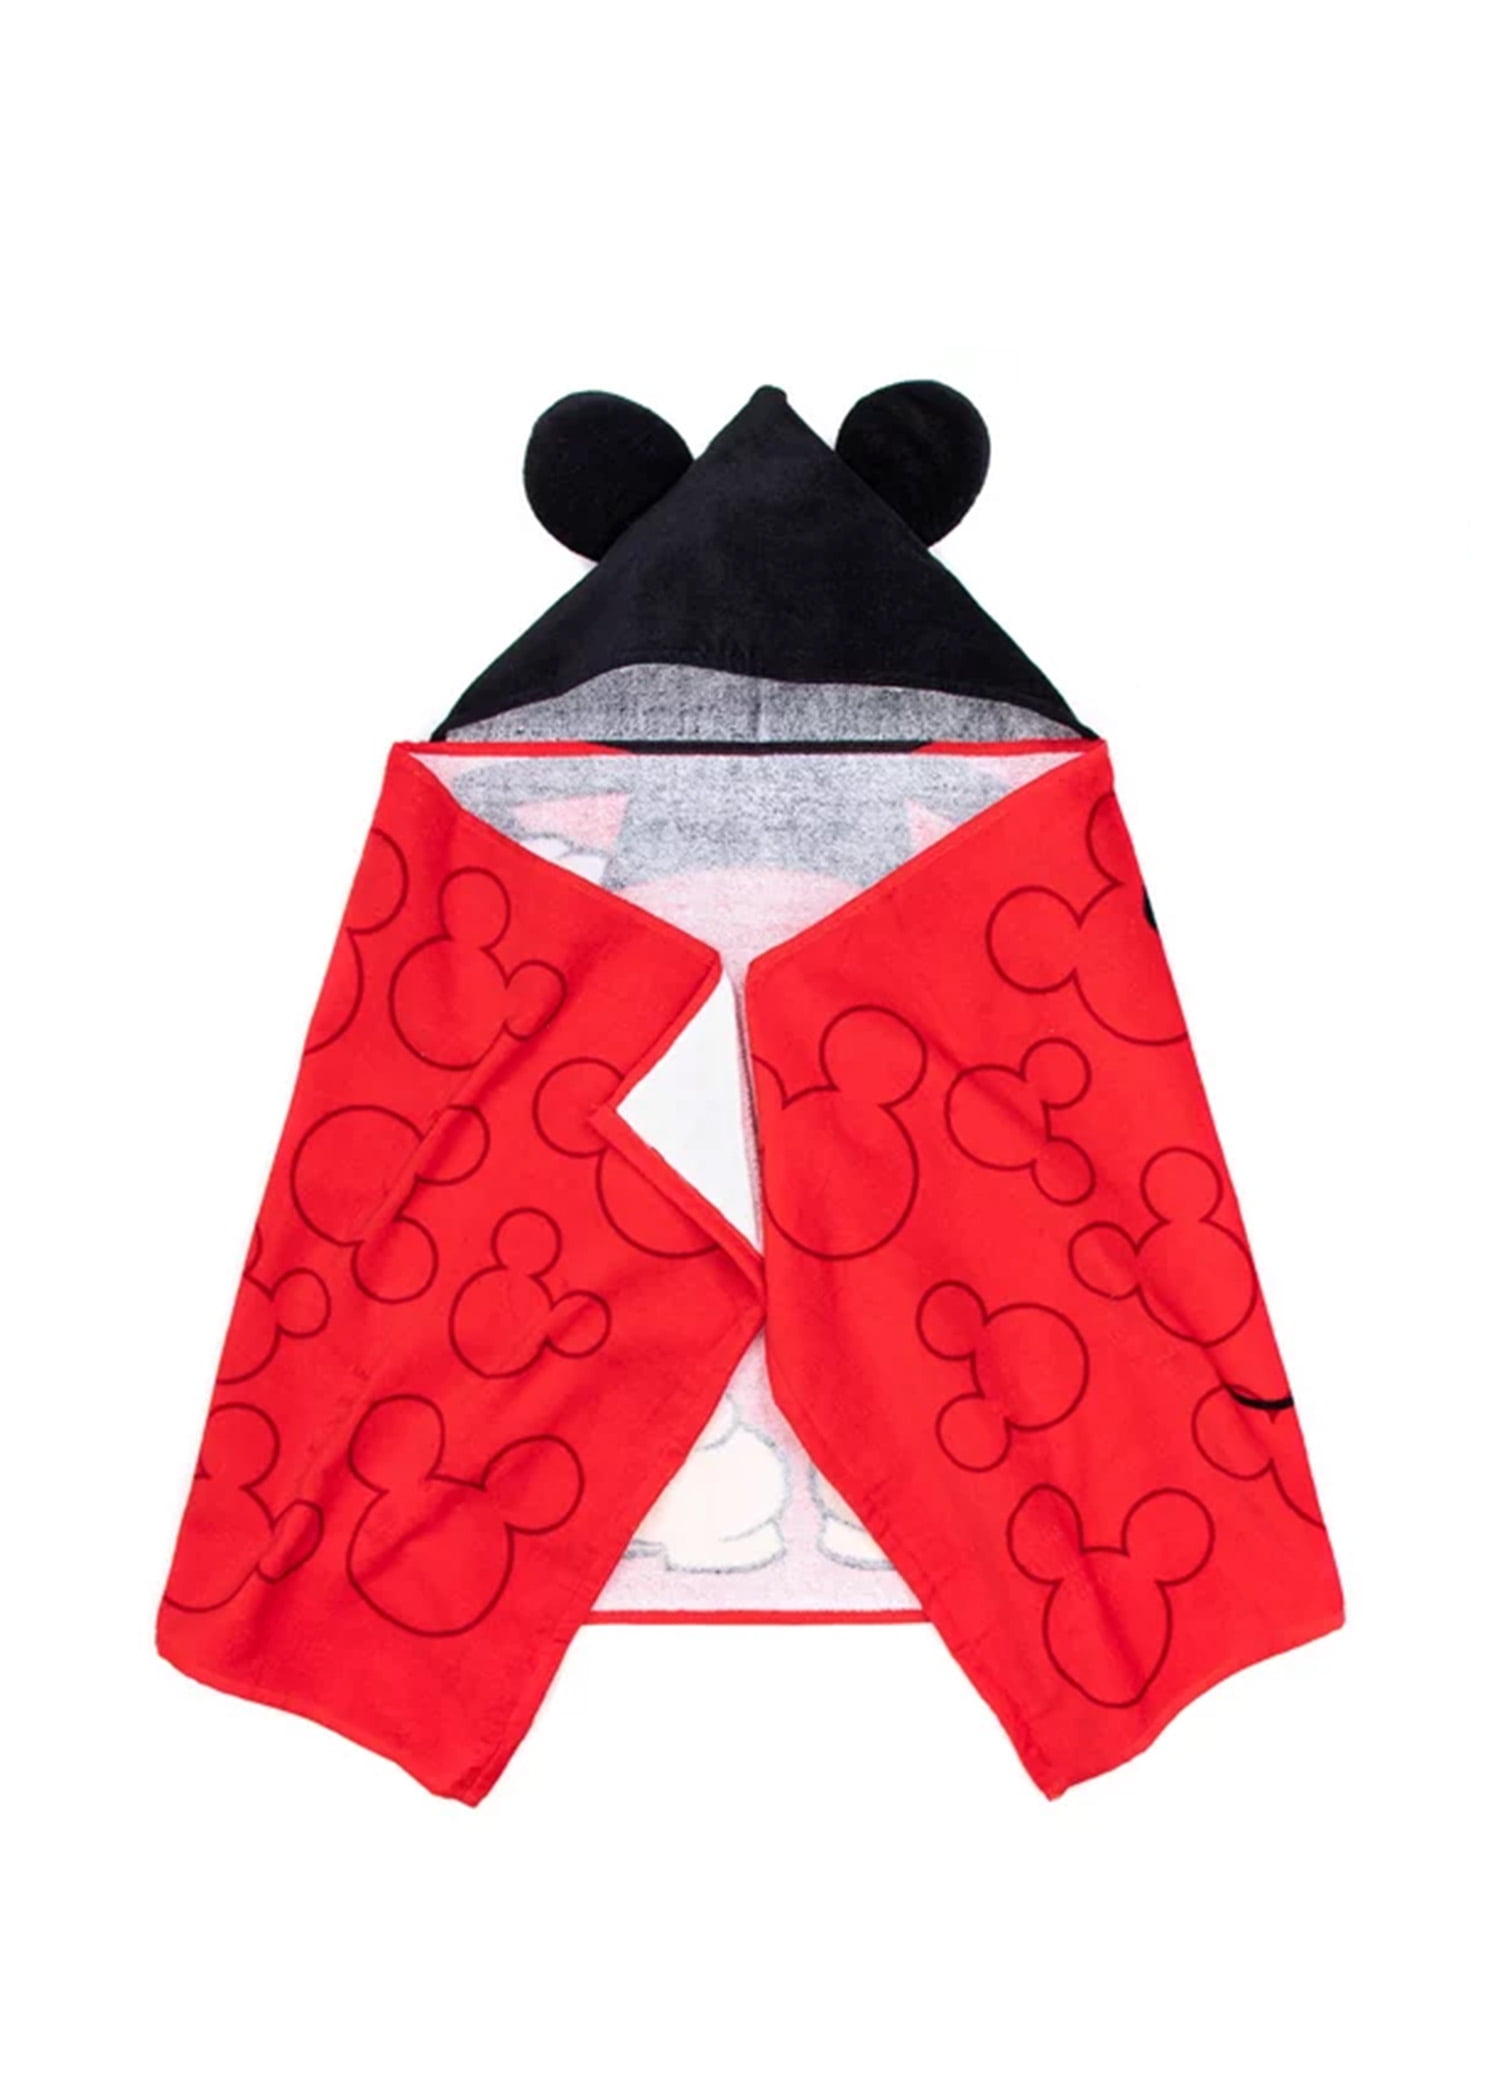 Mickey Mouse Kids Hooded Towel Wrap, 51 x 22, Cotton, Red, Disney